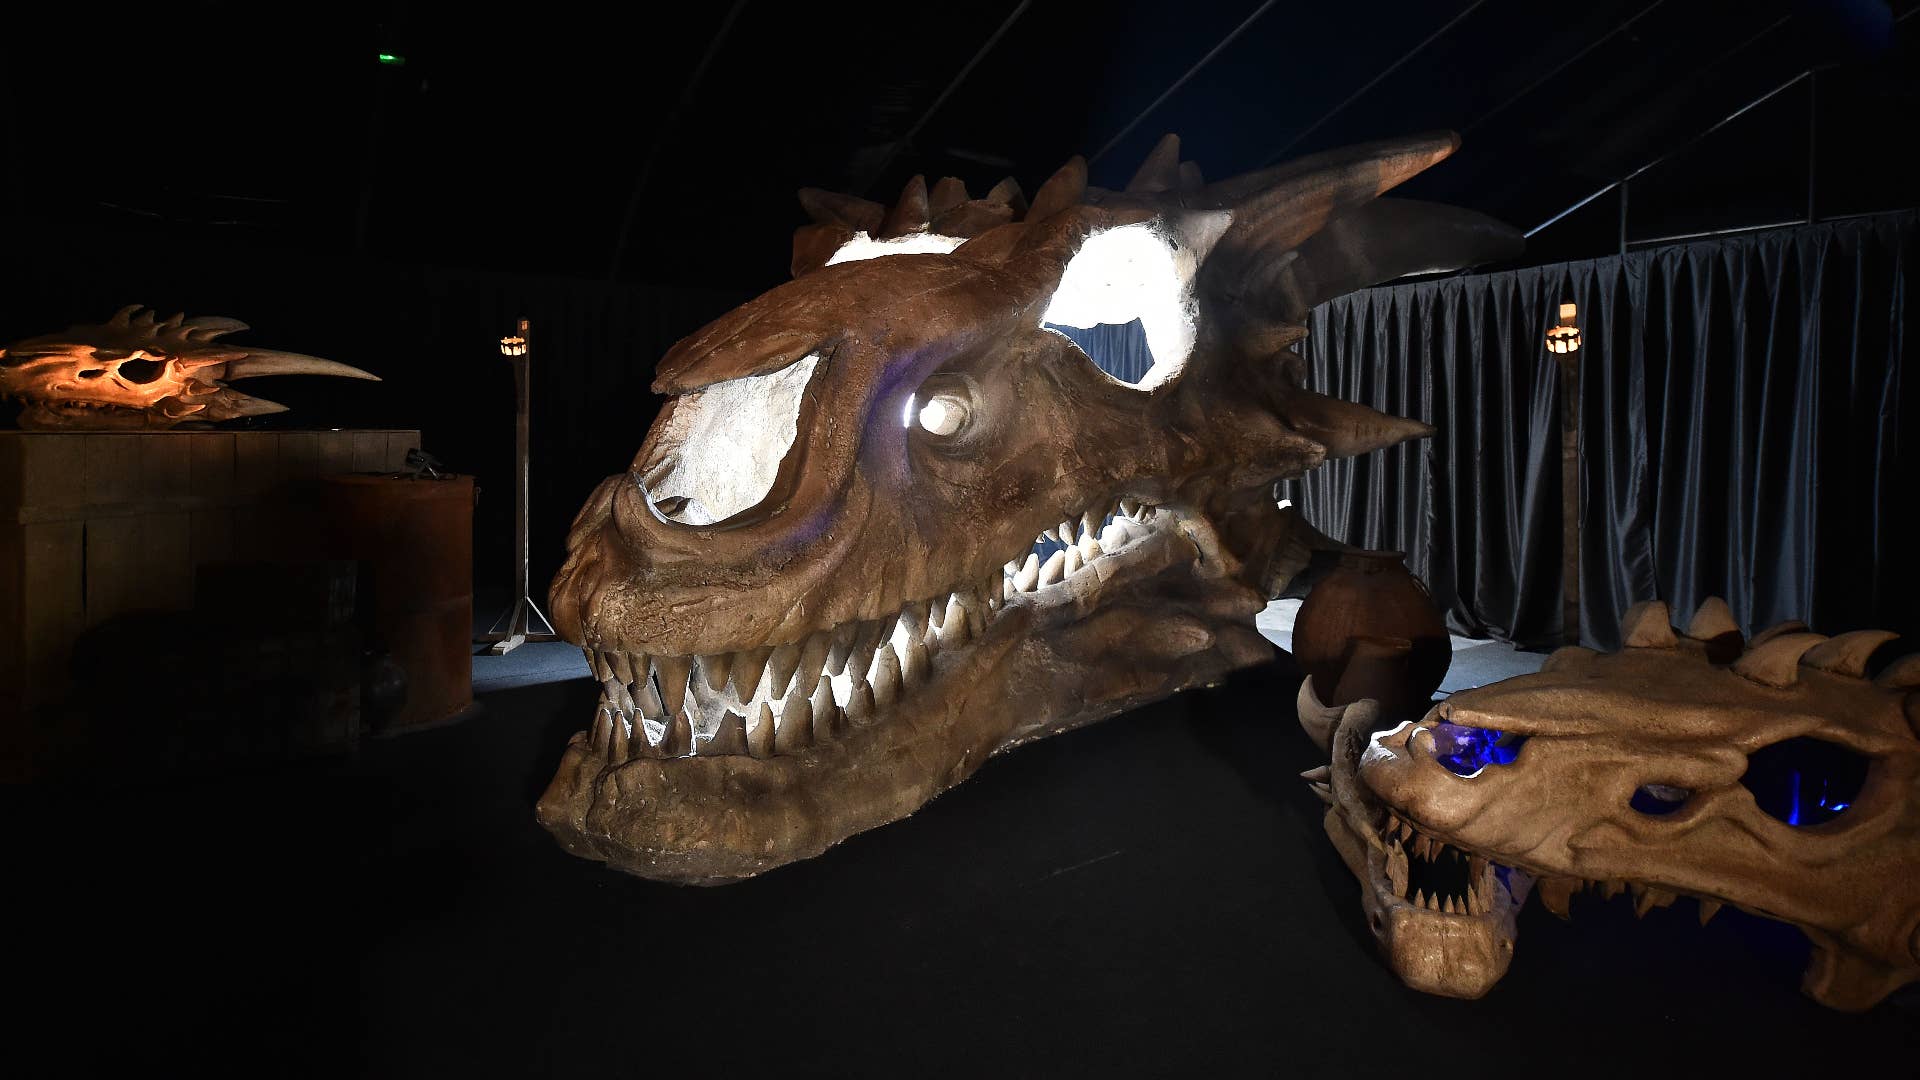 Dragon skulls can be seen on display at the Game Of Thrones: The Touring Exhibition.